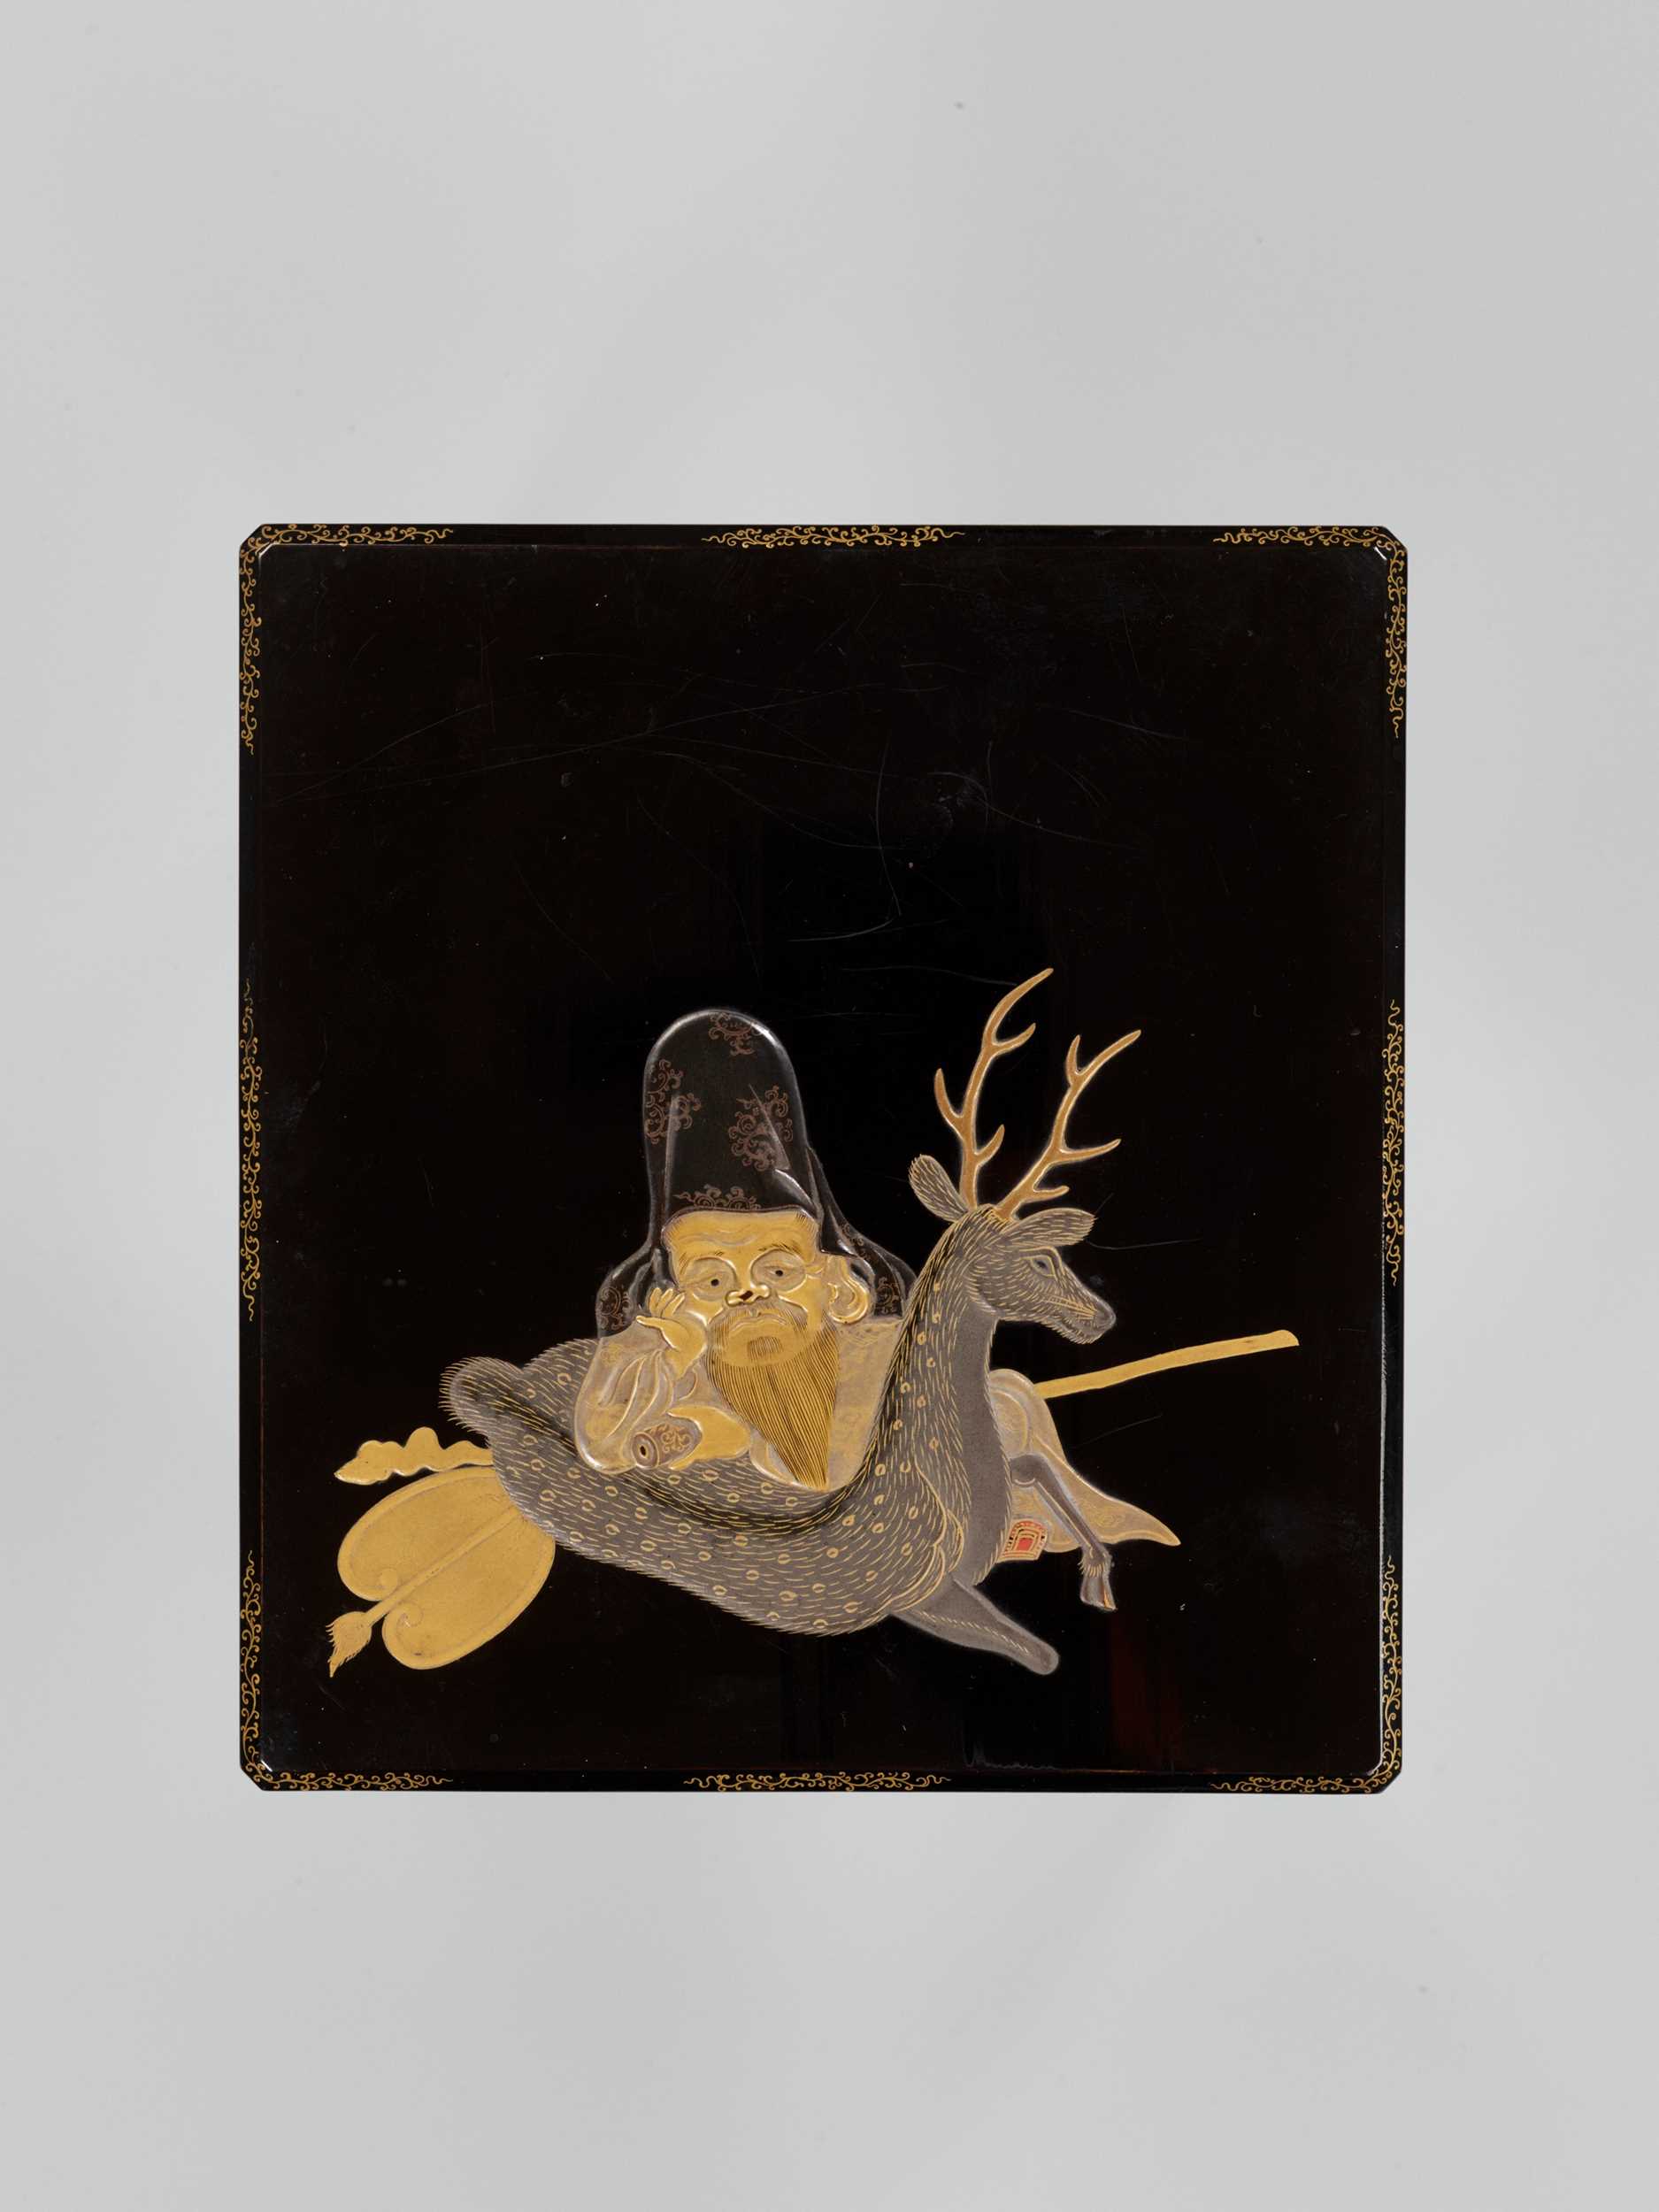 Lot 195 - A LACQUER SUZURIBAKO WITH JUROJIN AND DEER